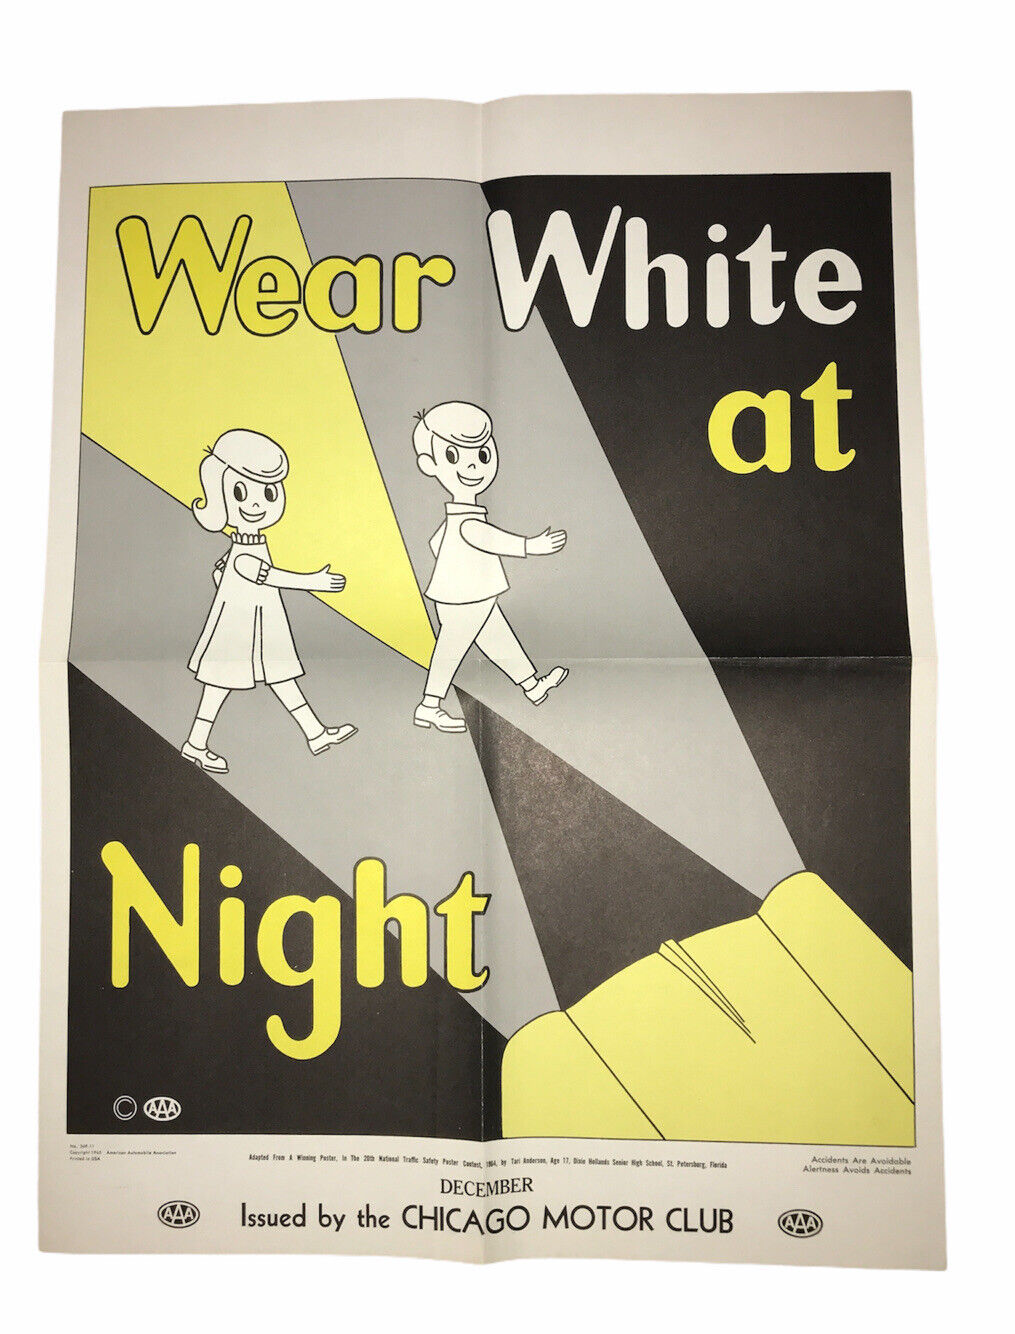 AAA Chicago Motor Club “Wear White At Night” 2 Sided Safety Posters 1965